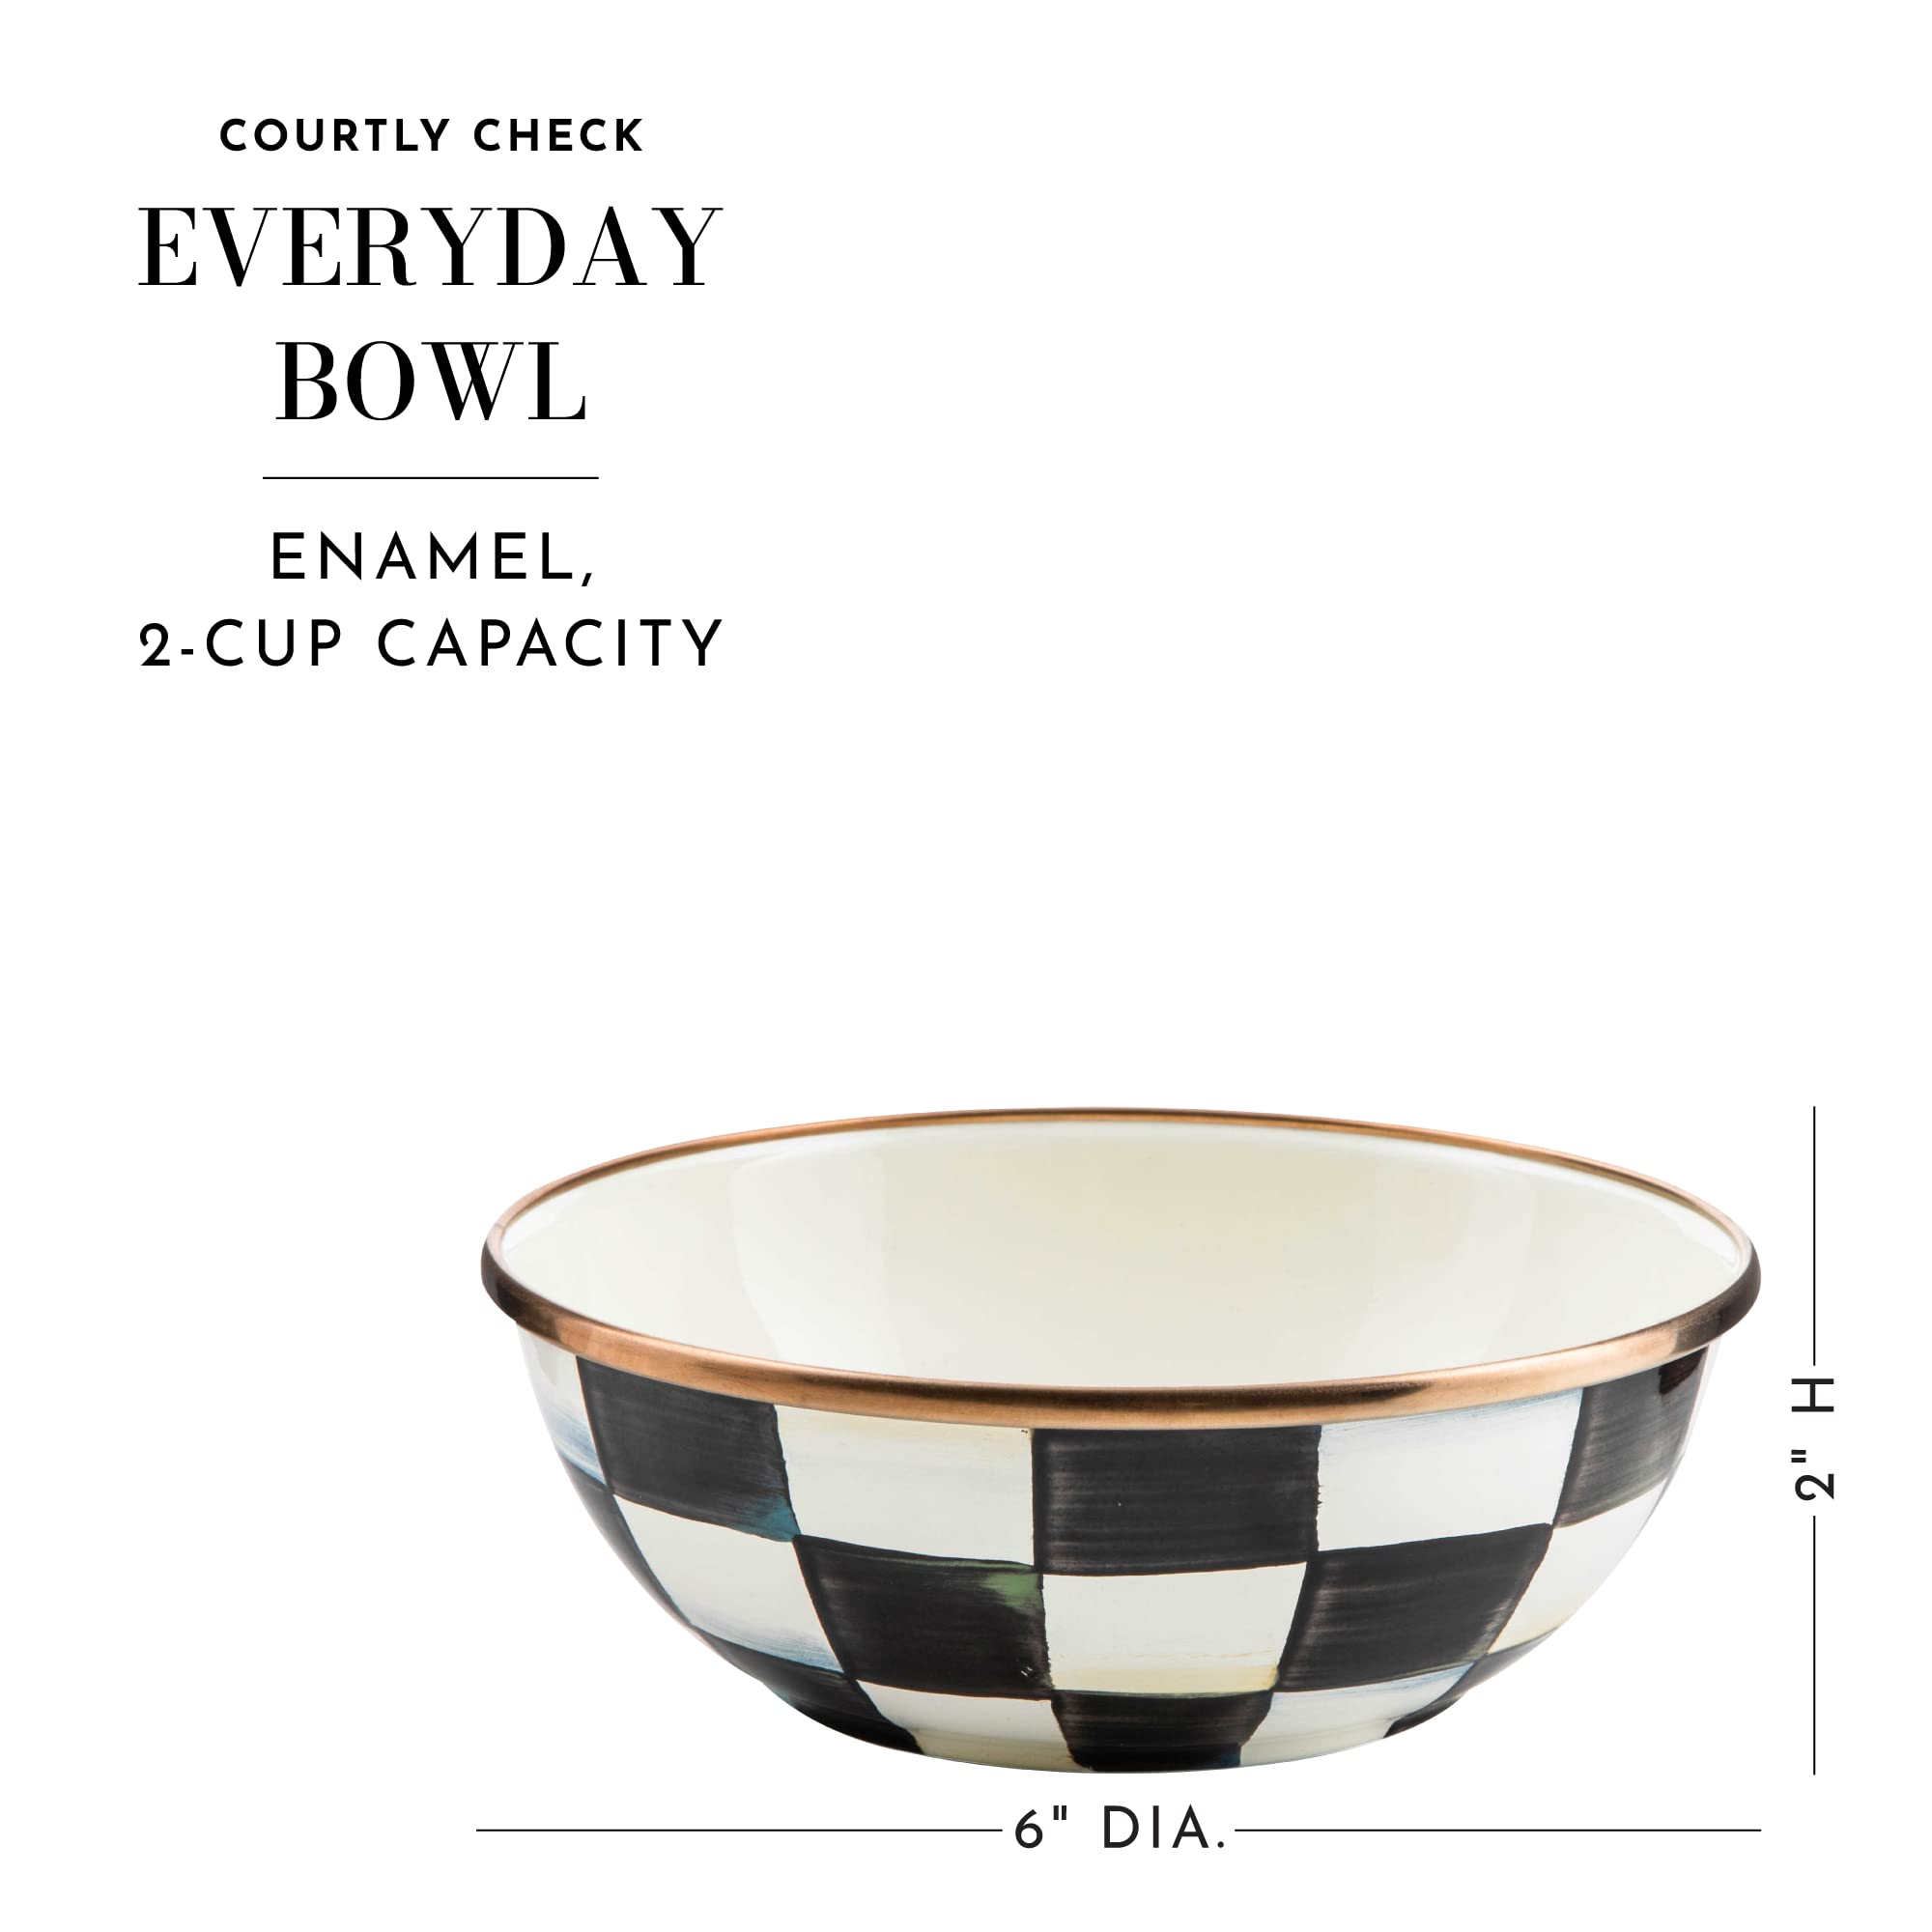 MACKENZIE-CHILDS Courtly Check Enamel Everyday Bowl, Serving Bowls for Entertaining